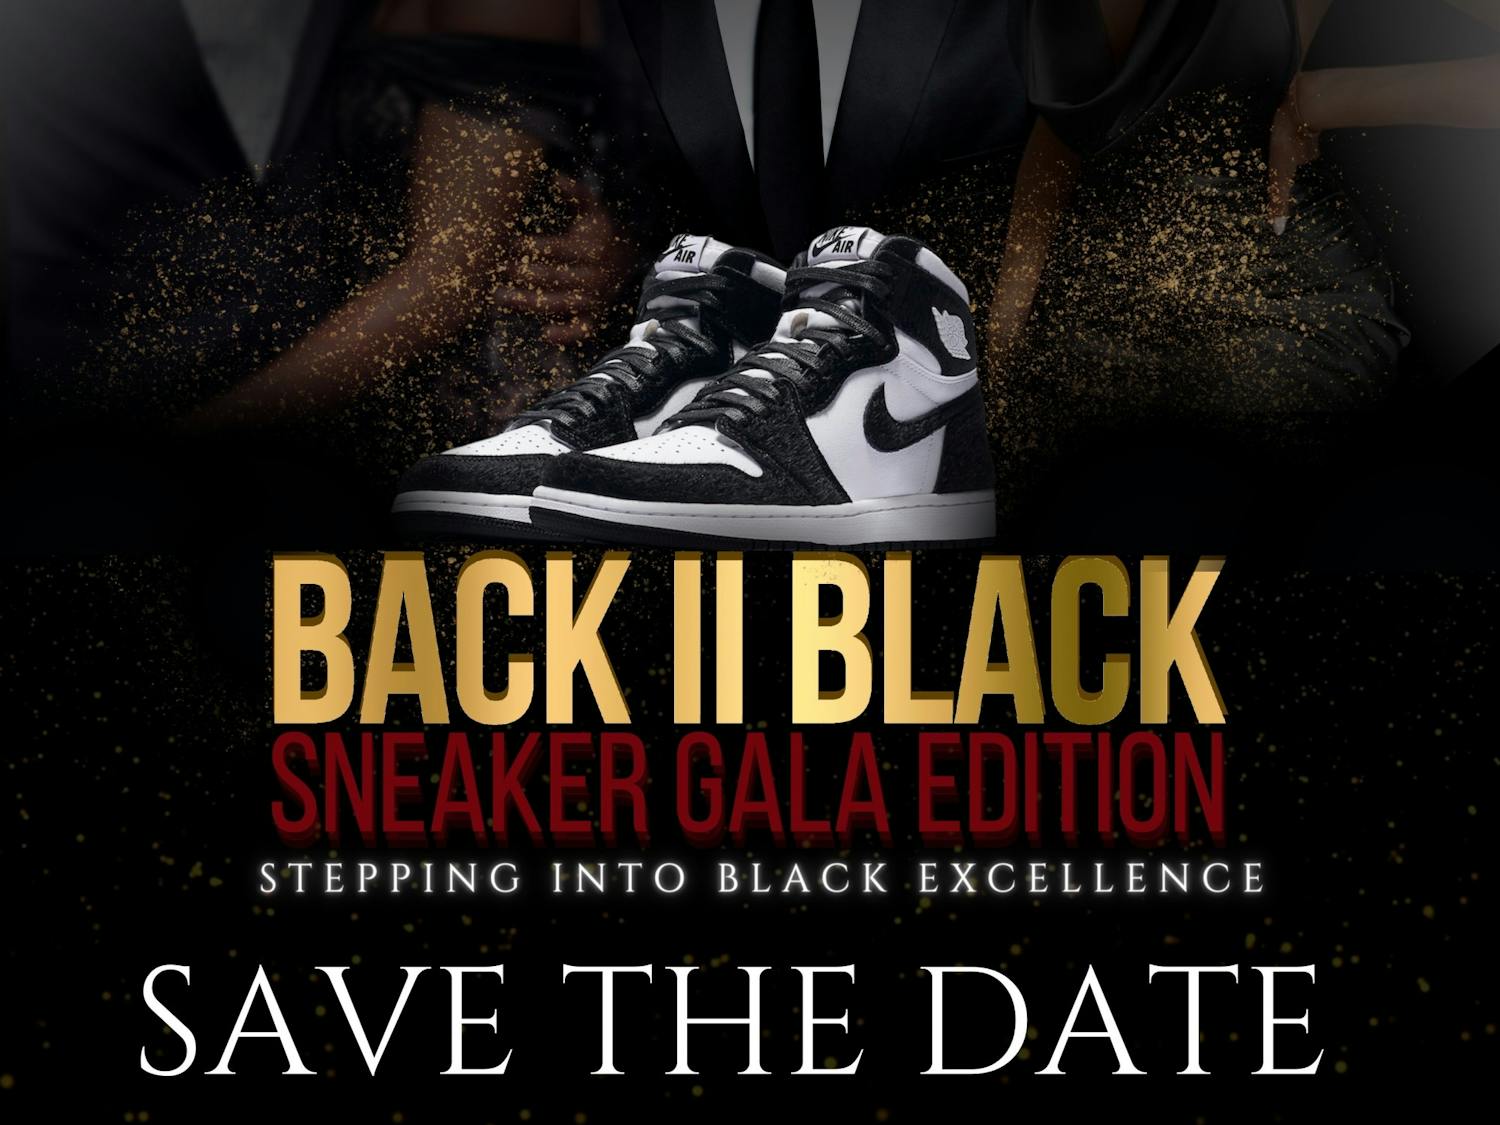 The Black II Black Gala returns Feb. 25, 2022. Presented by BOND and SAVVY, the gala aims to create a community amongst Black students at USC and join in a celebration around Black excellence.